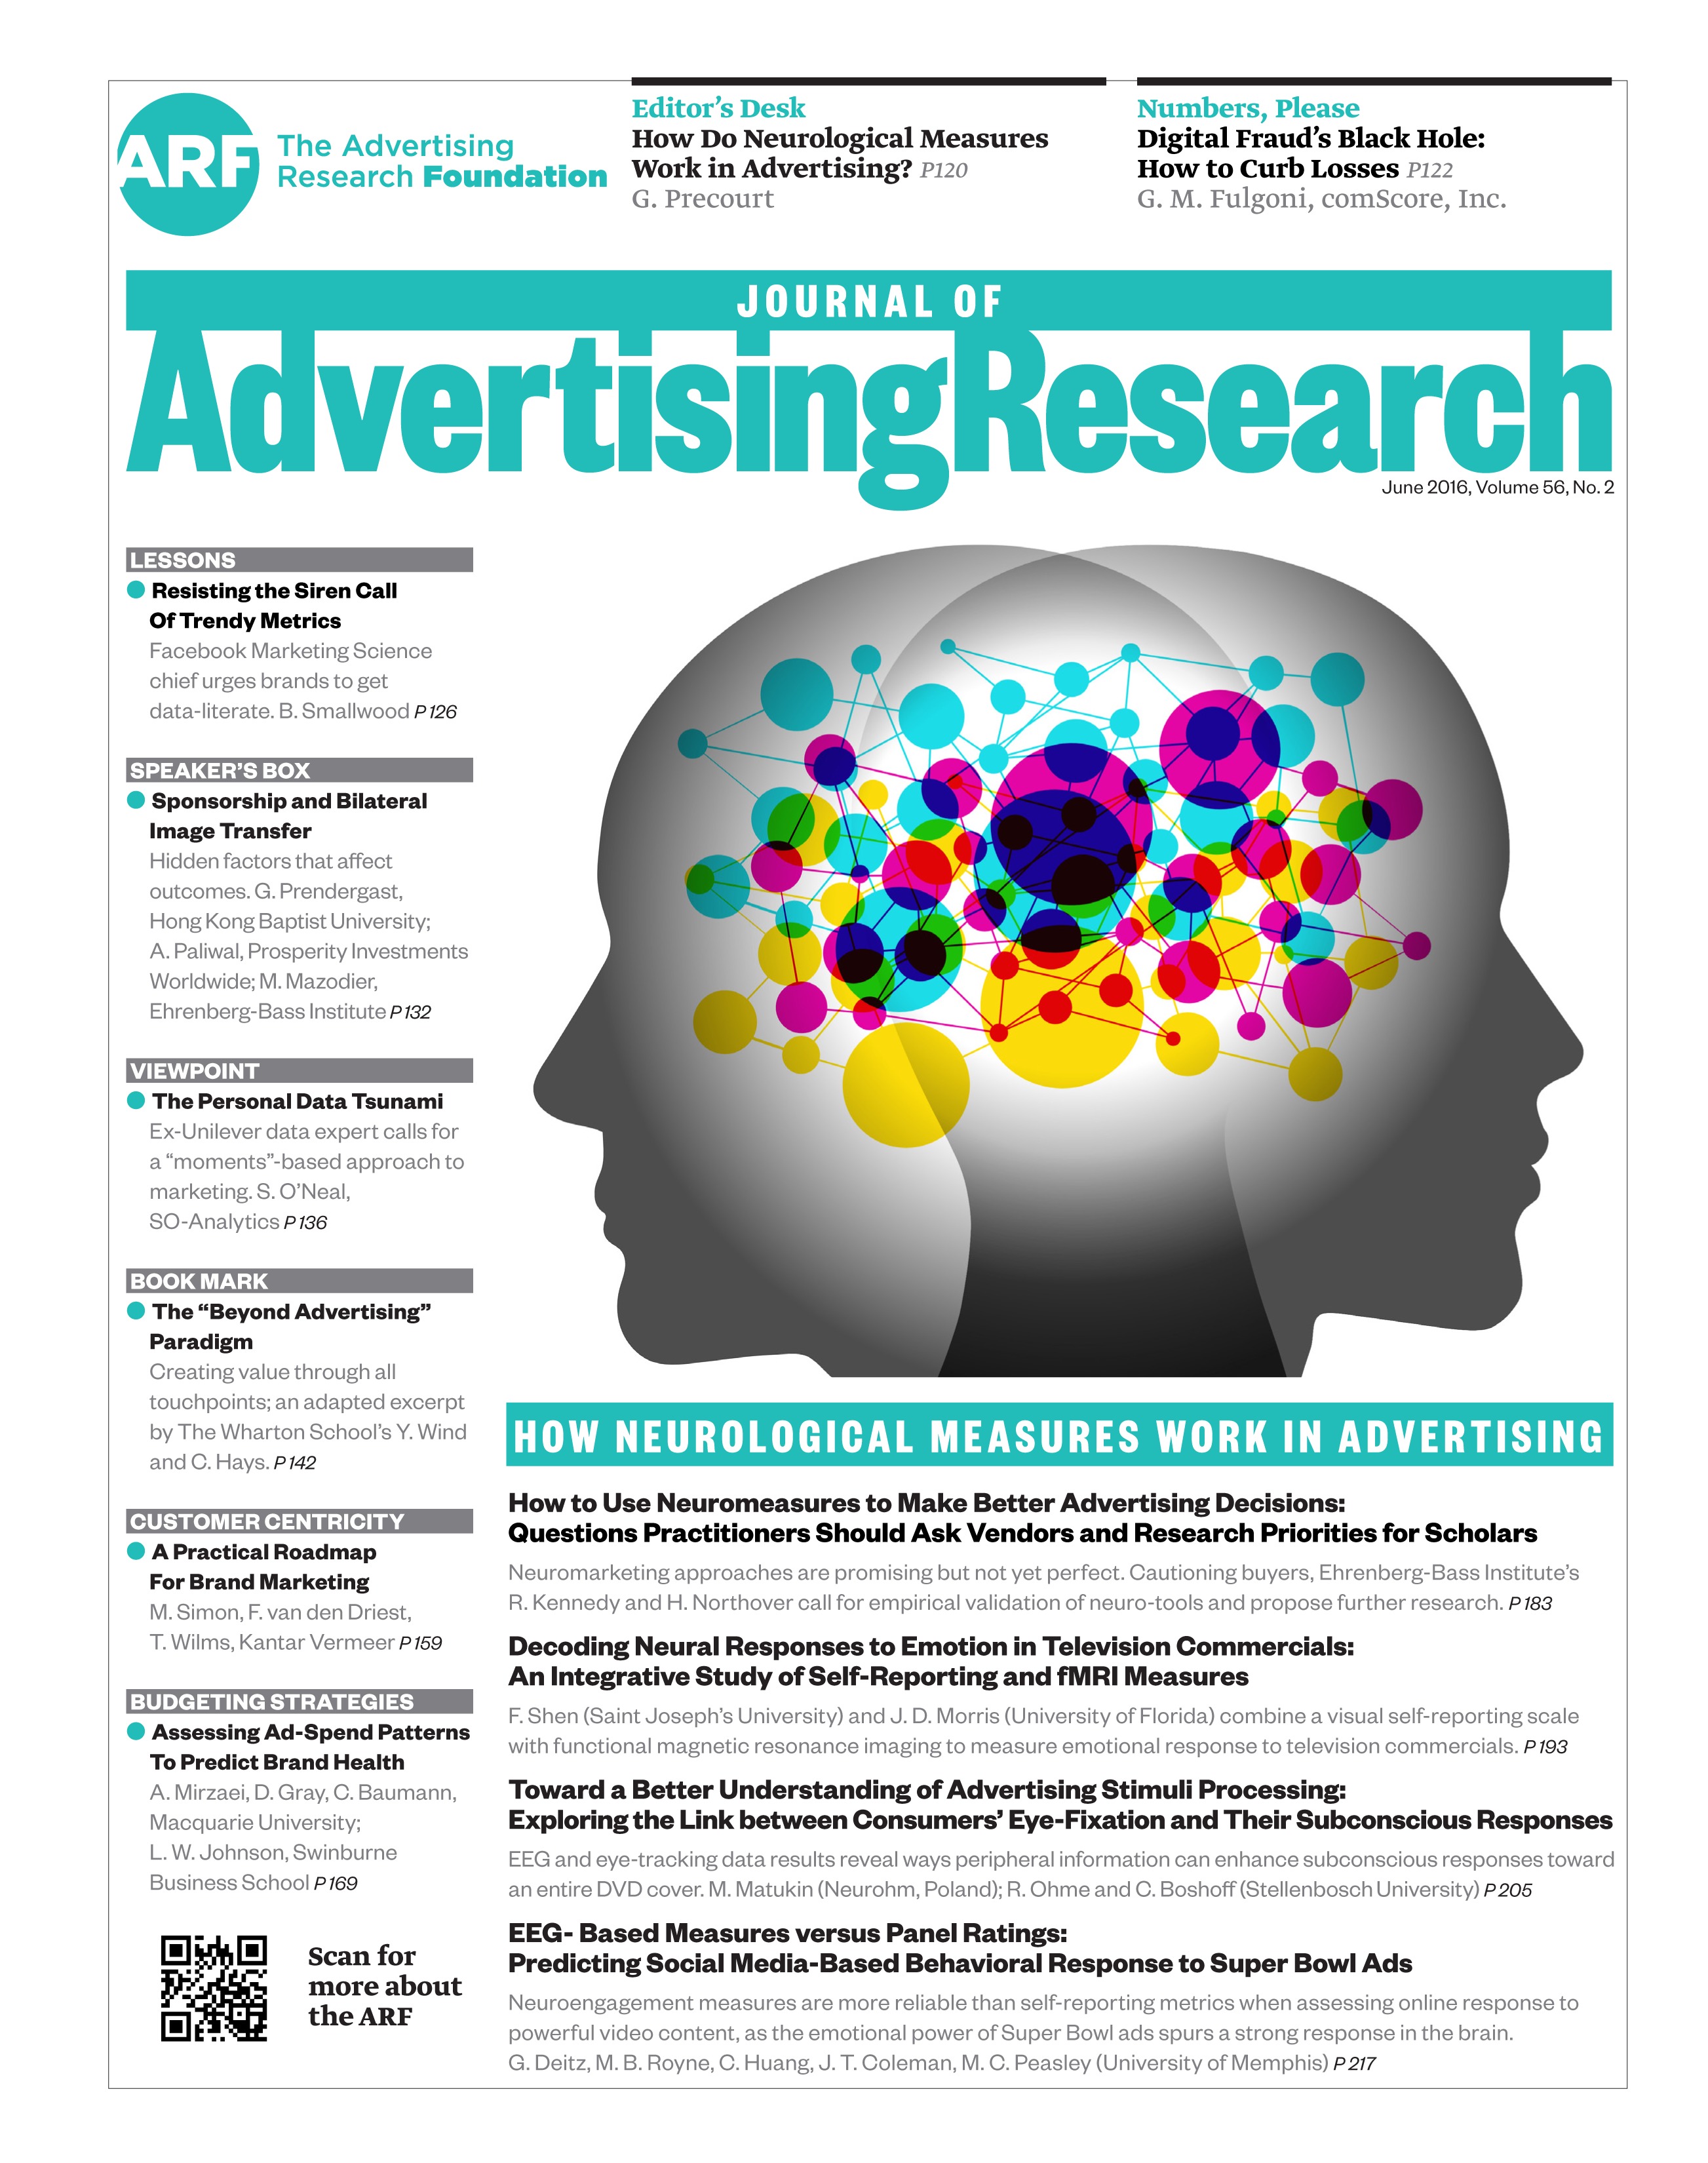 research on ads